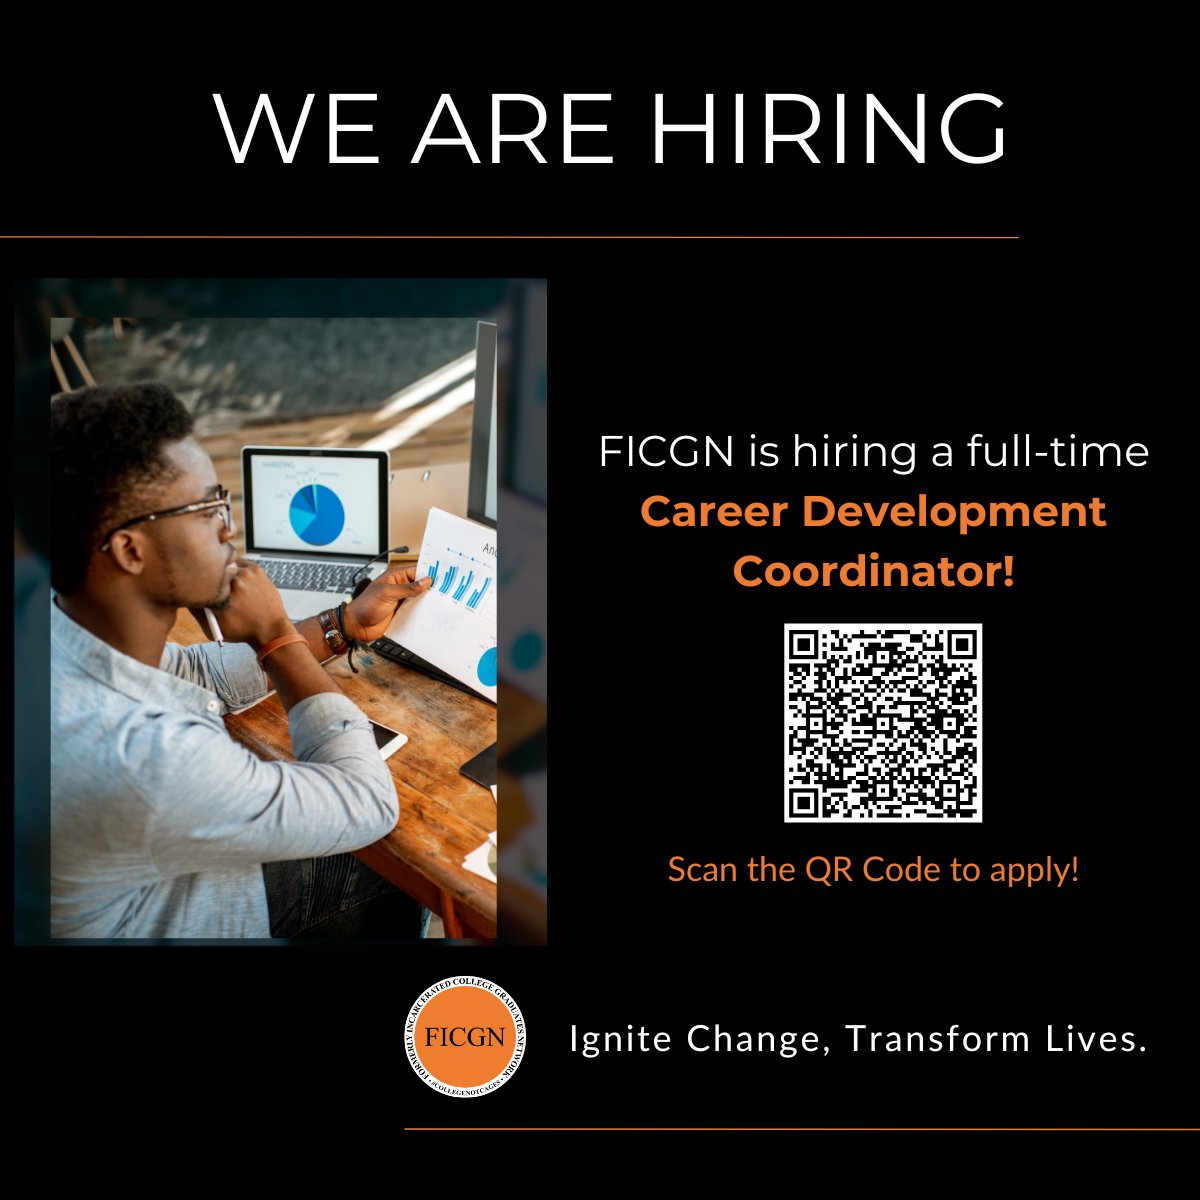 Applications for our new Career Development Coordinator close this weekend! You can apply now: ow.ly/pqPL50RkK0q